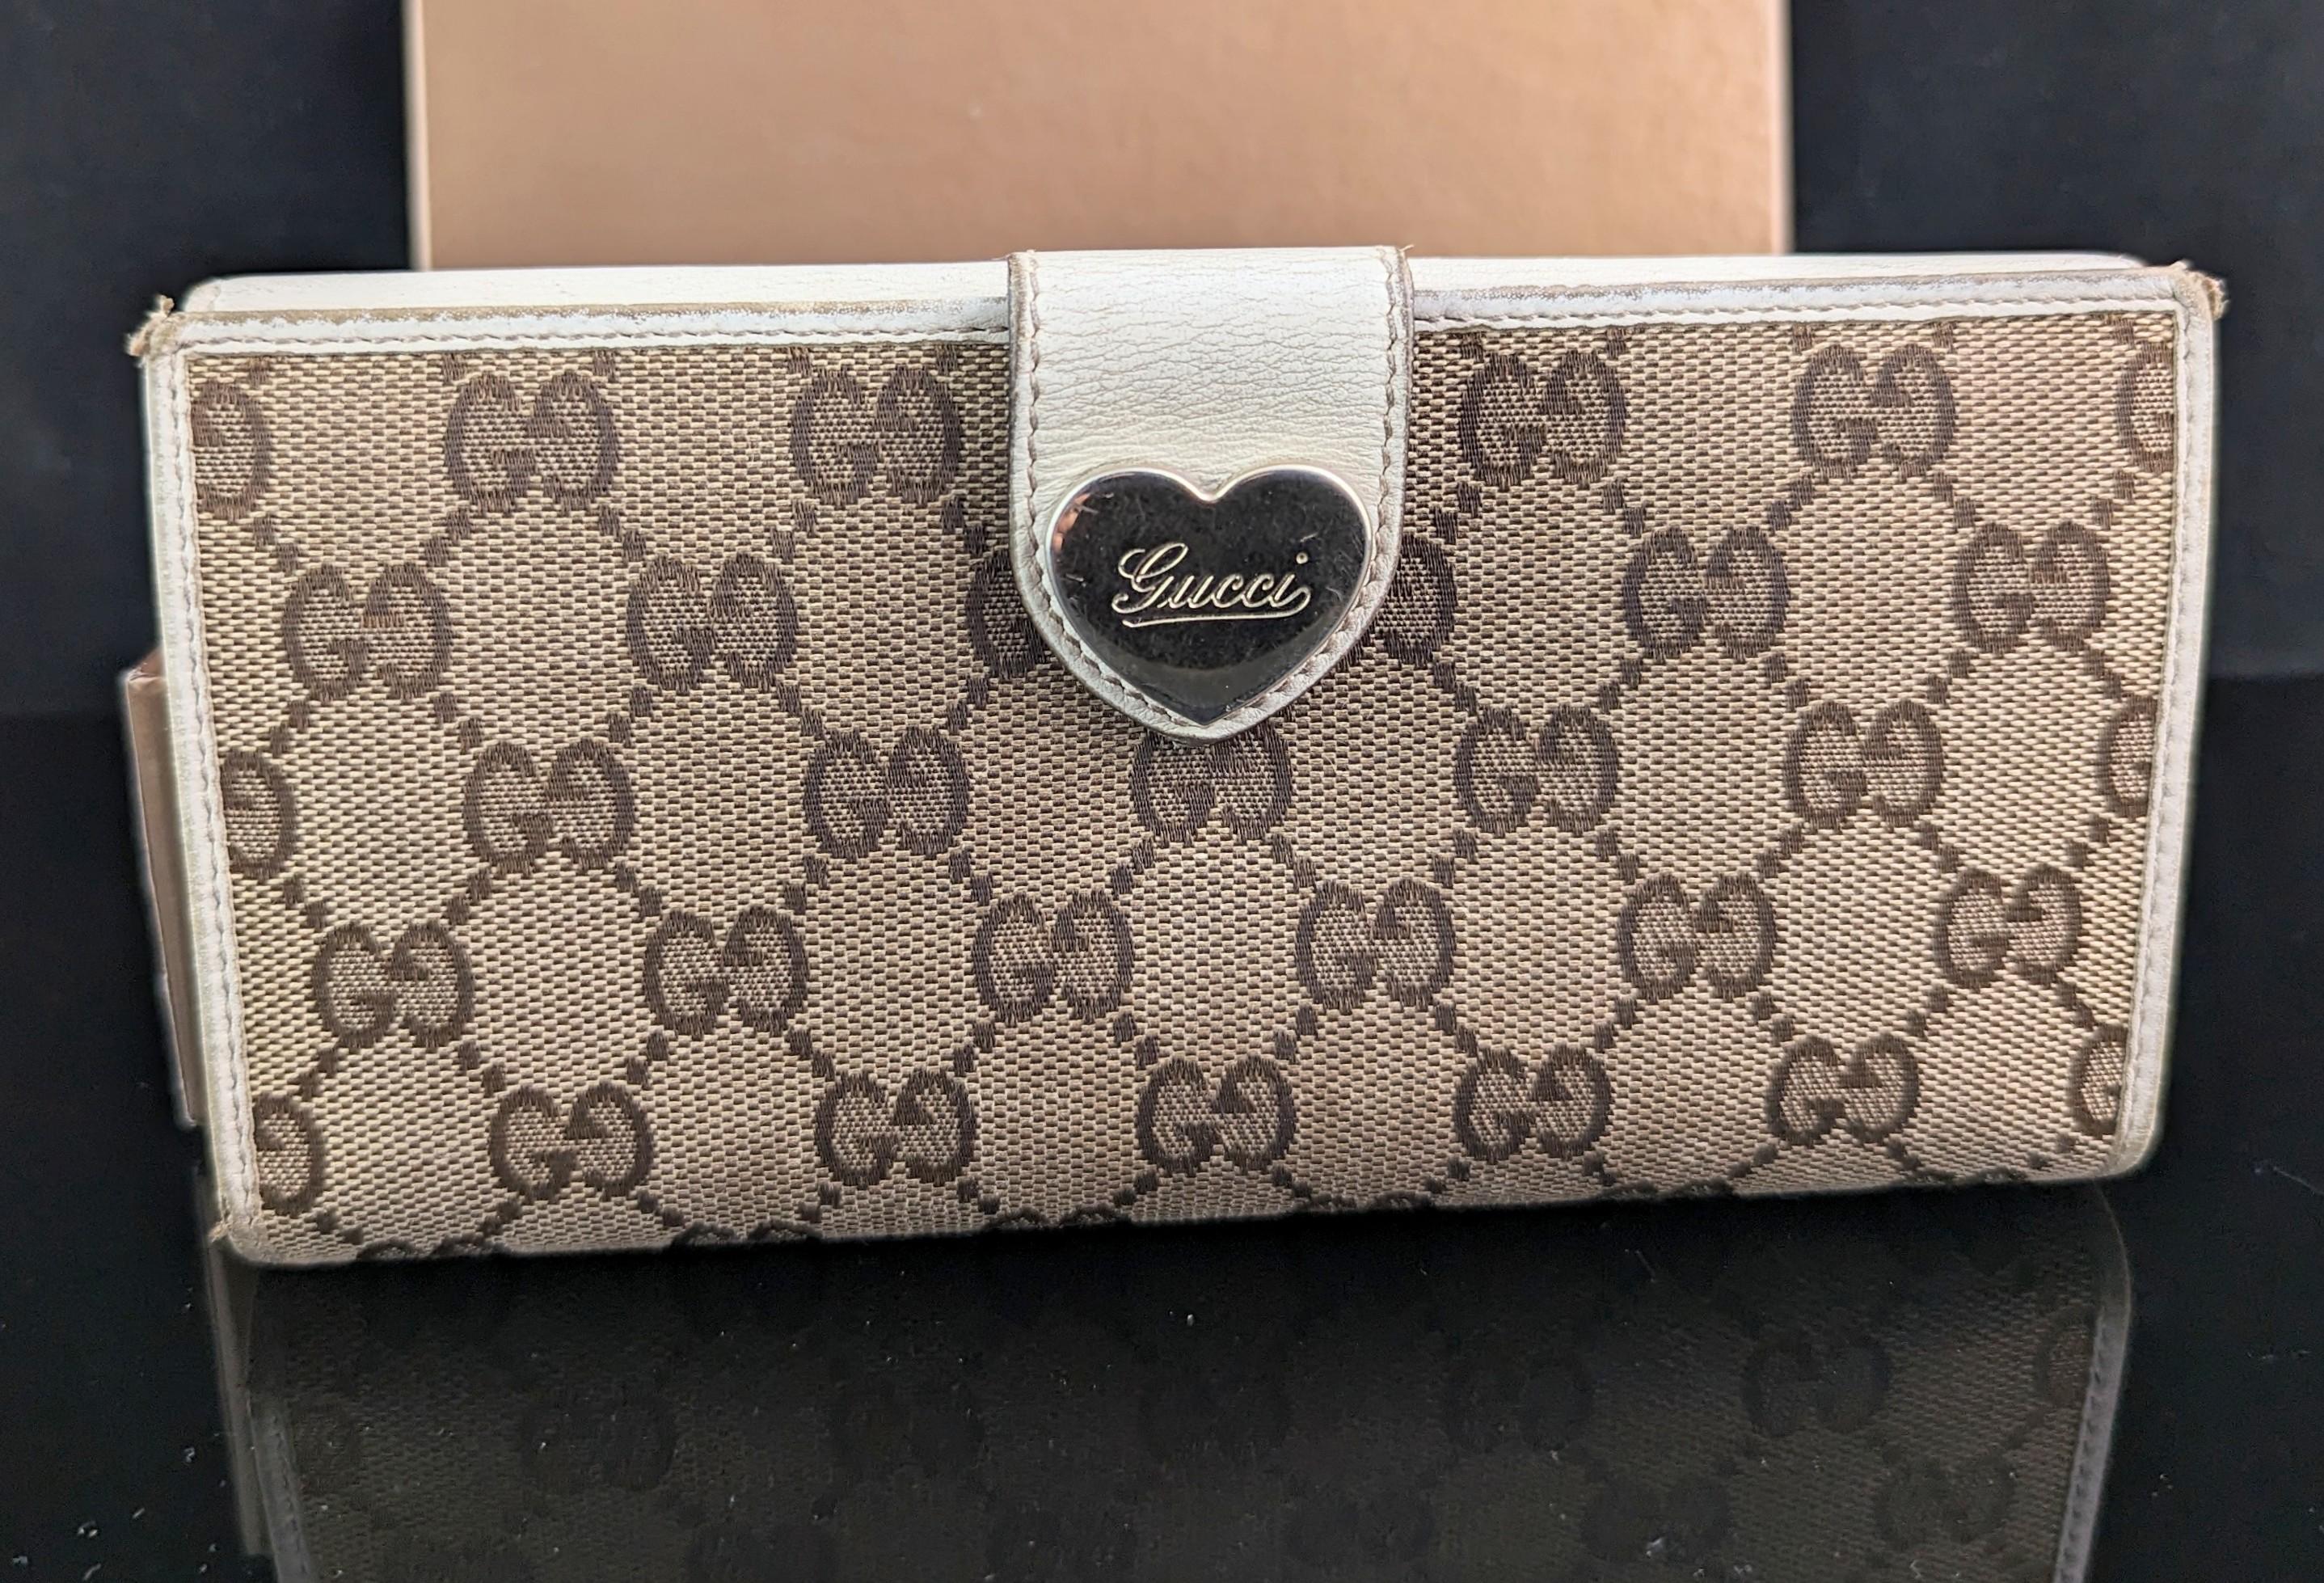 An Iconic vintage early 2000s ladies Gucci GG monogram purse.

This is a signature monogram canvas covered larger size purse with cream leather and gold tone metal hardware including a gold heart metal clasp.

The purse has multiple internal